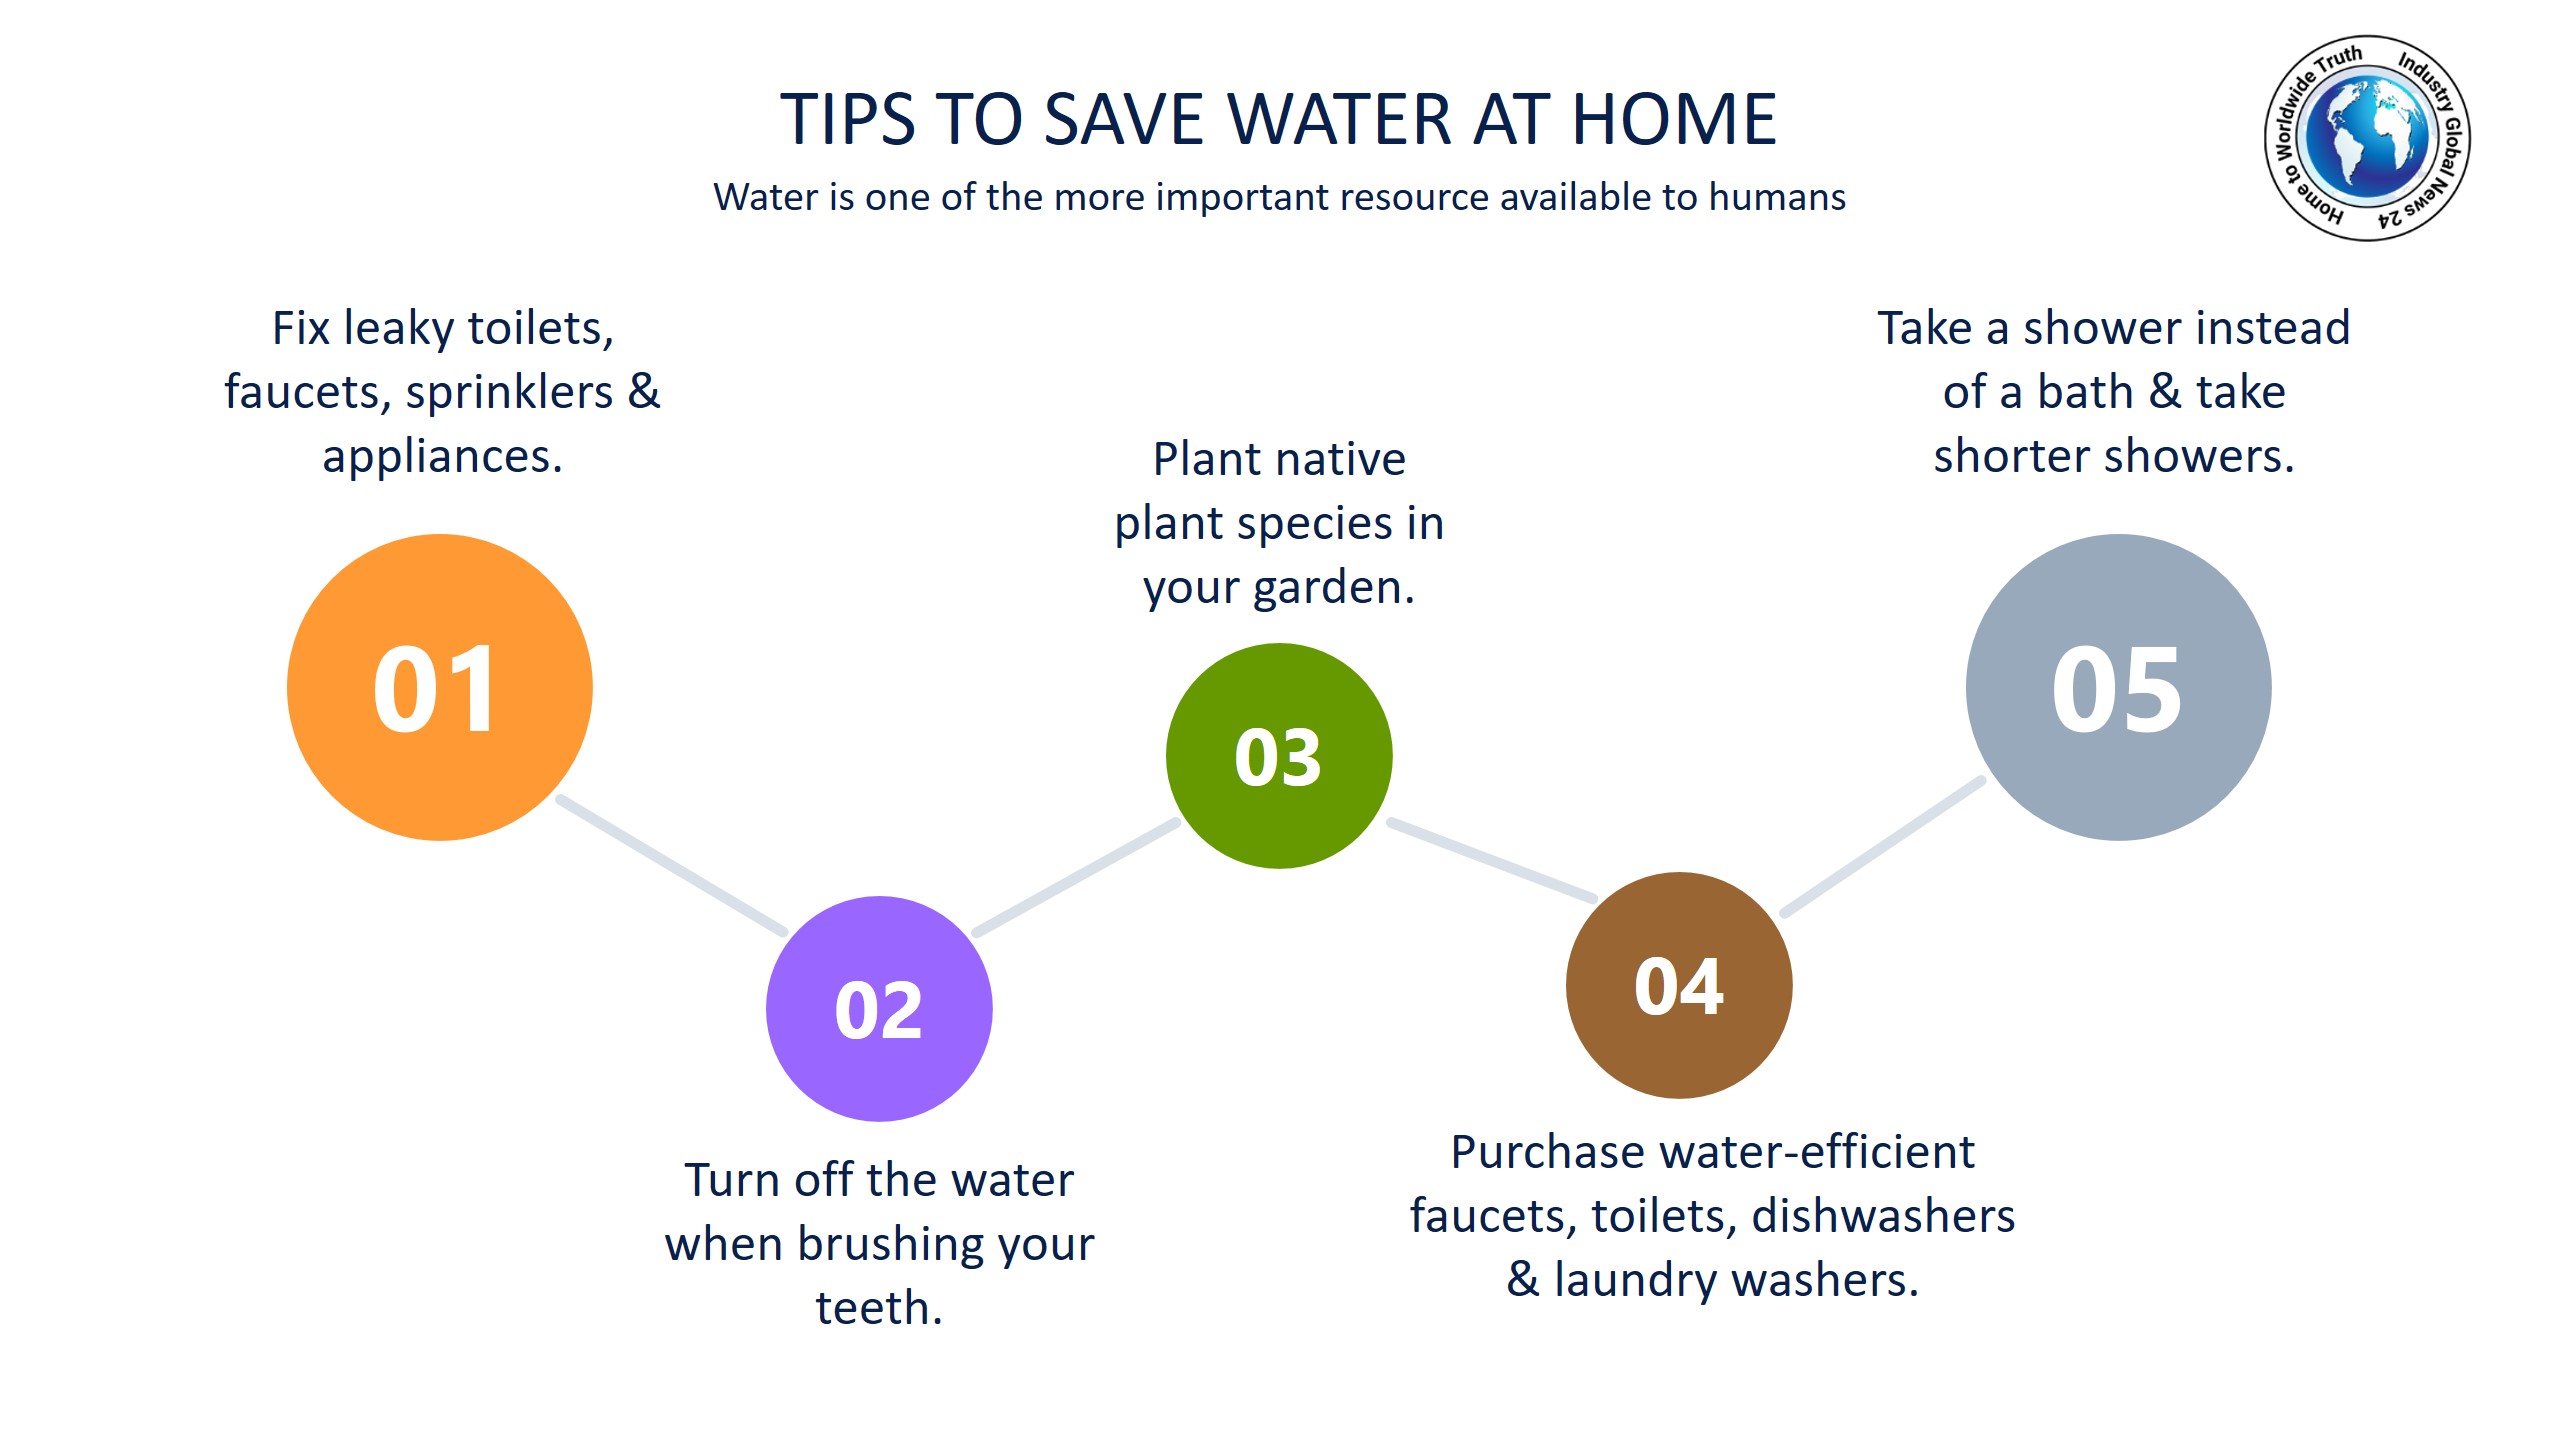 Tips to save water at home